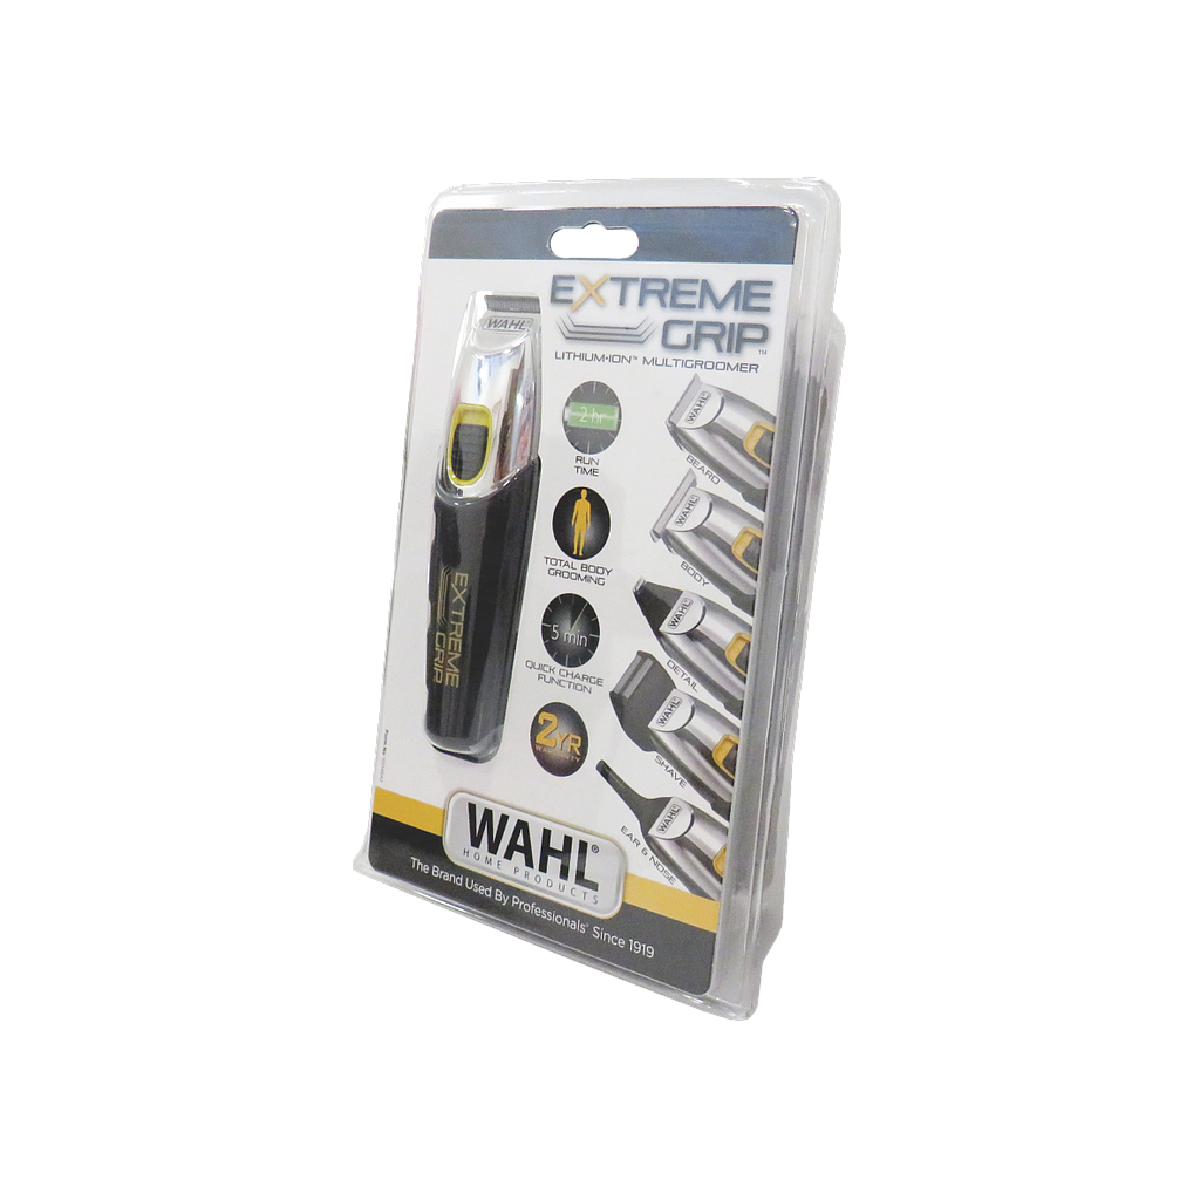 WAHL Lithium-Ion Extreme Grip Trimmer Kit